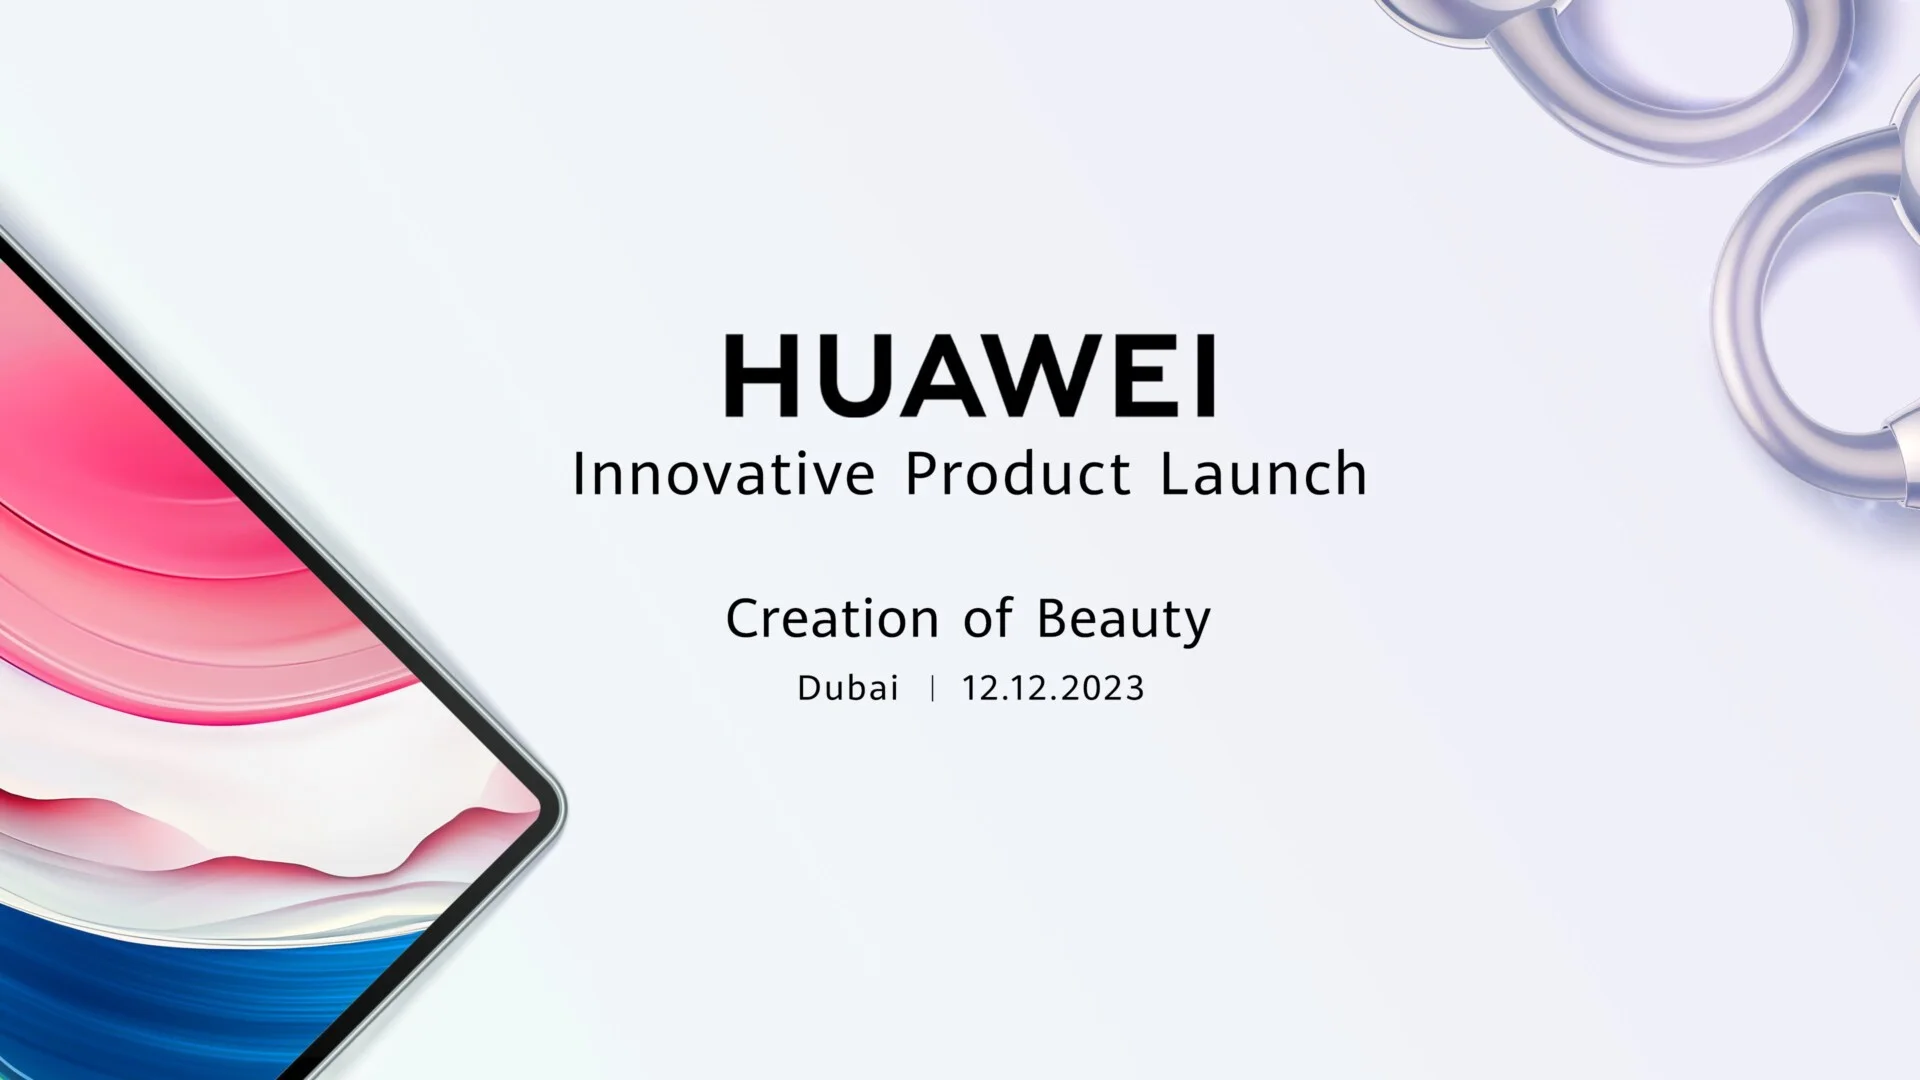 Huawei Innovative Product Launch